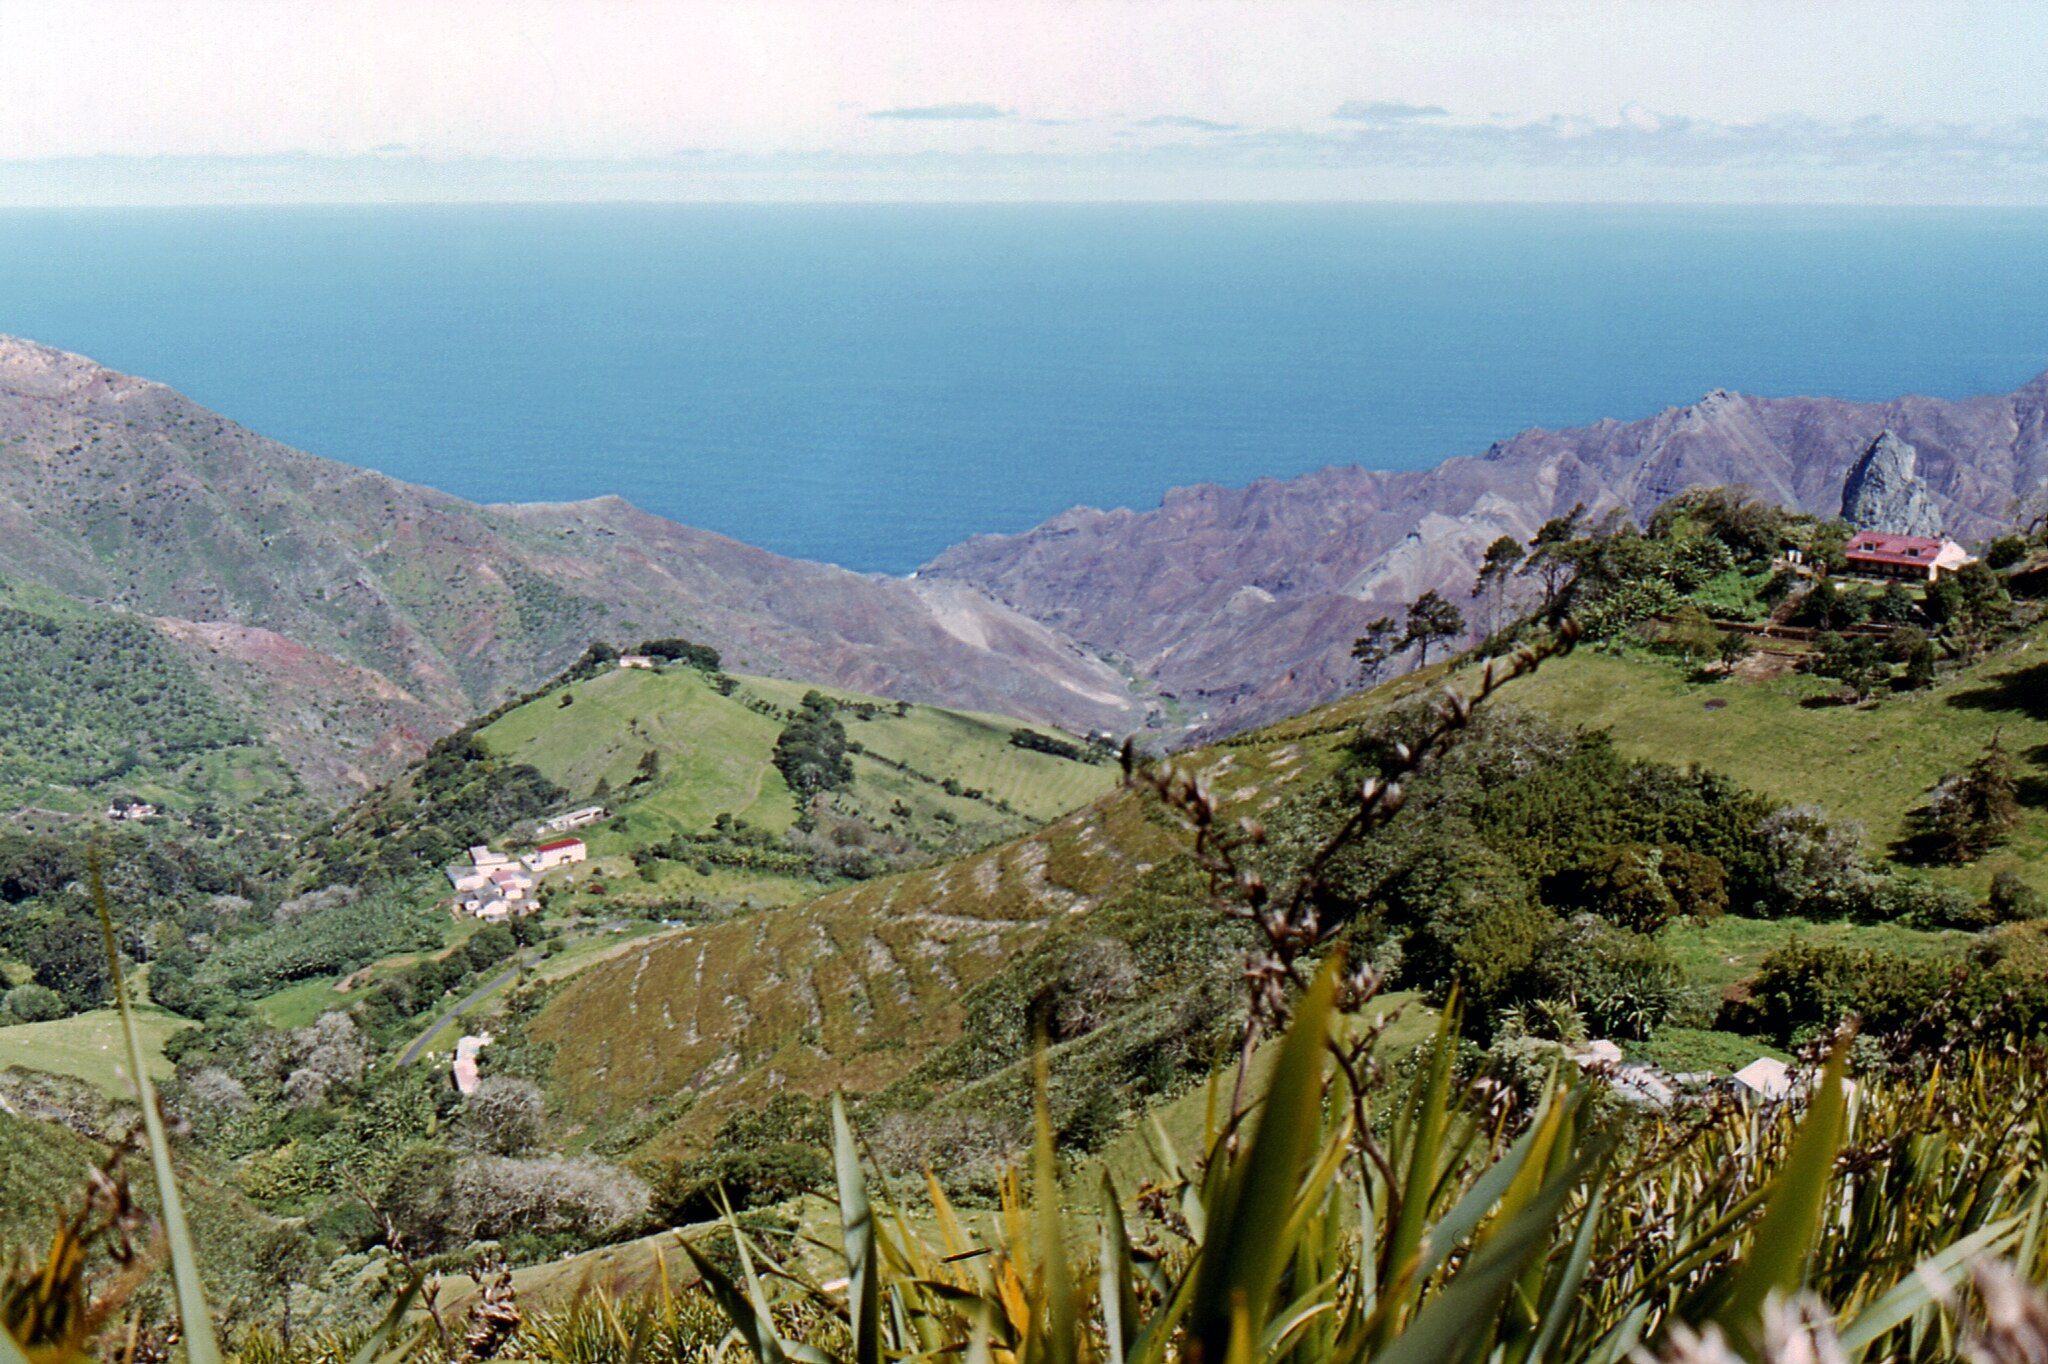 1985 view of the remote St. Helena Island